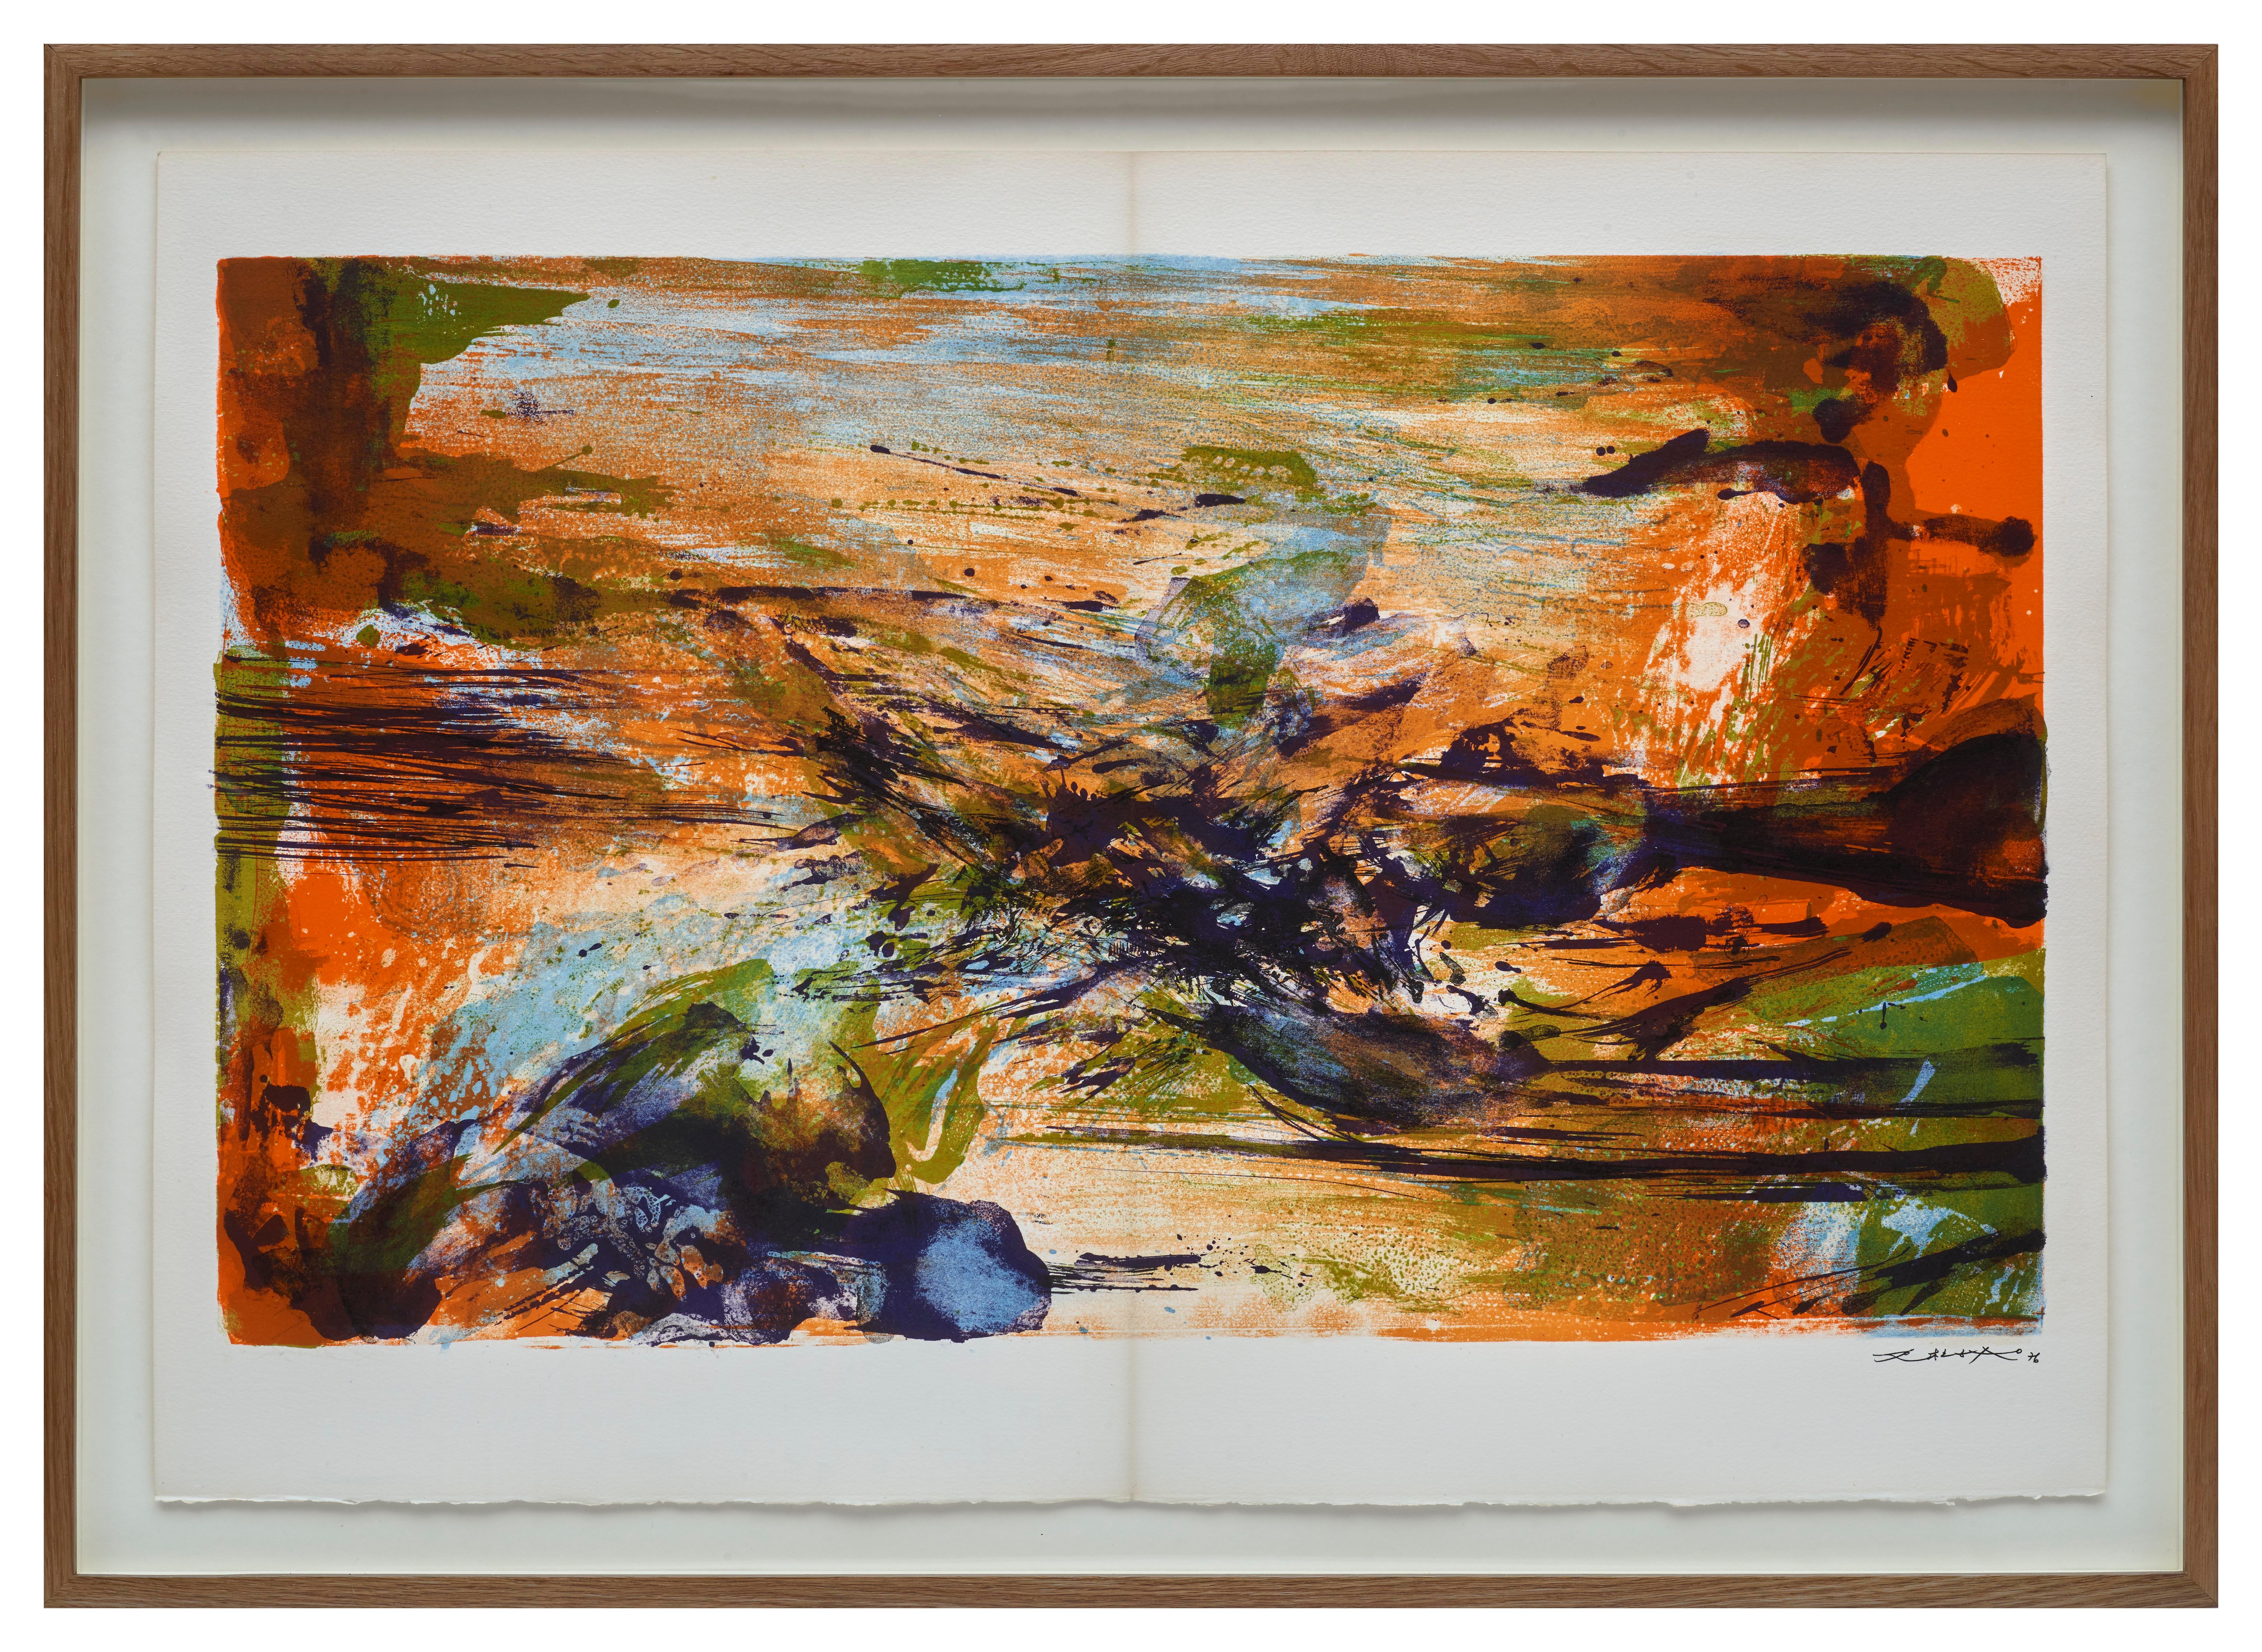 Zao Wou Ki
À la Gloire de l'Image et Art Poétique (Ågerup 271-285), 1976
with the artist’s printed signature and date
The portfolio, comprising 15 lithographs printed in colours on Arches wove paper, loose (as issued), contained in a paper